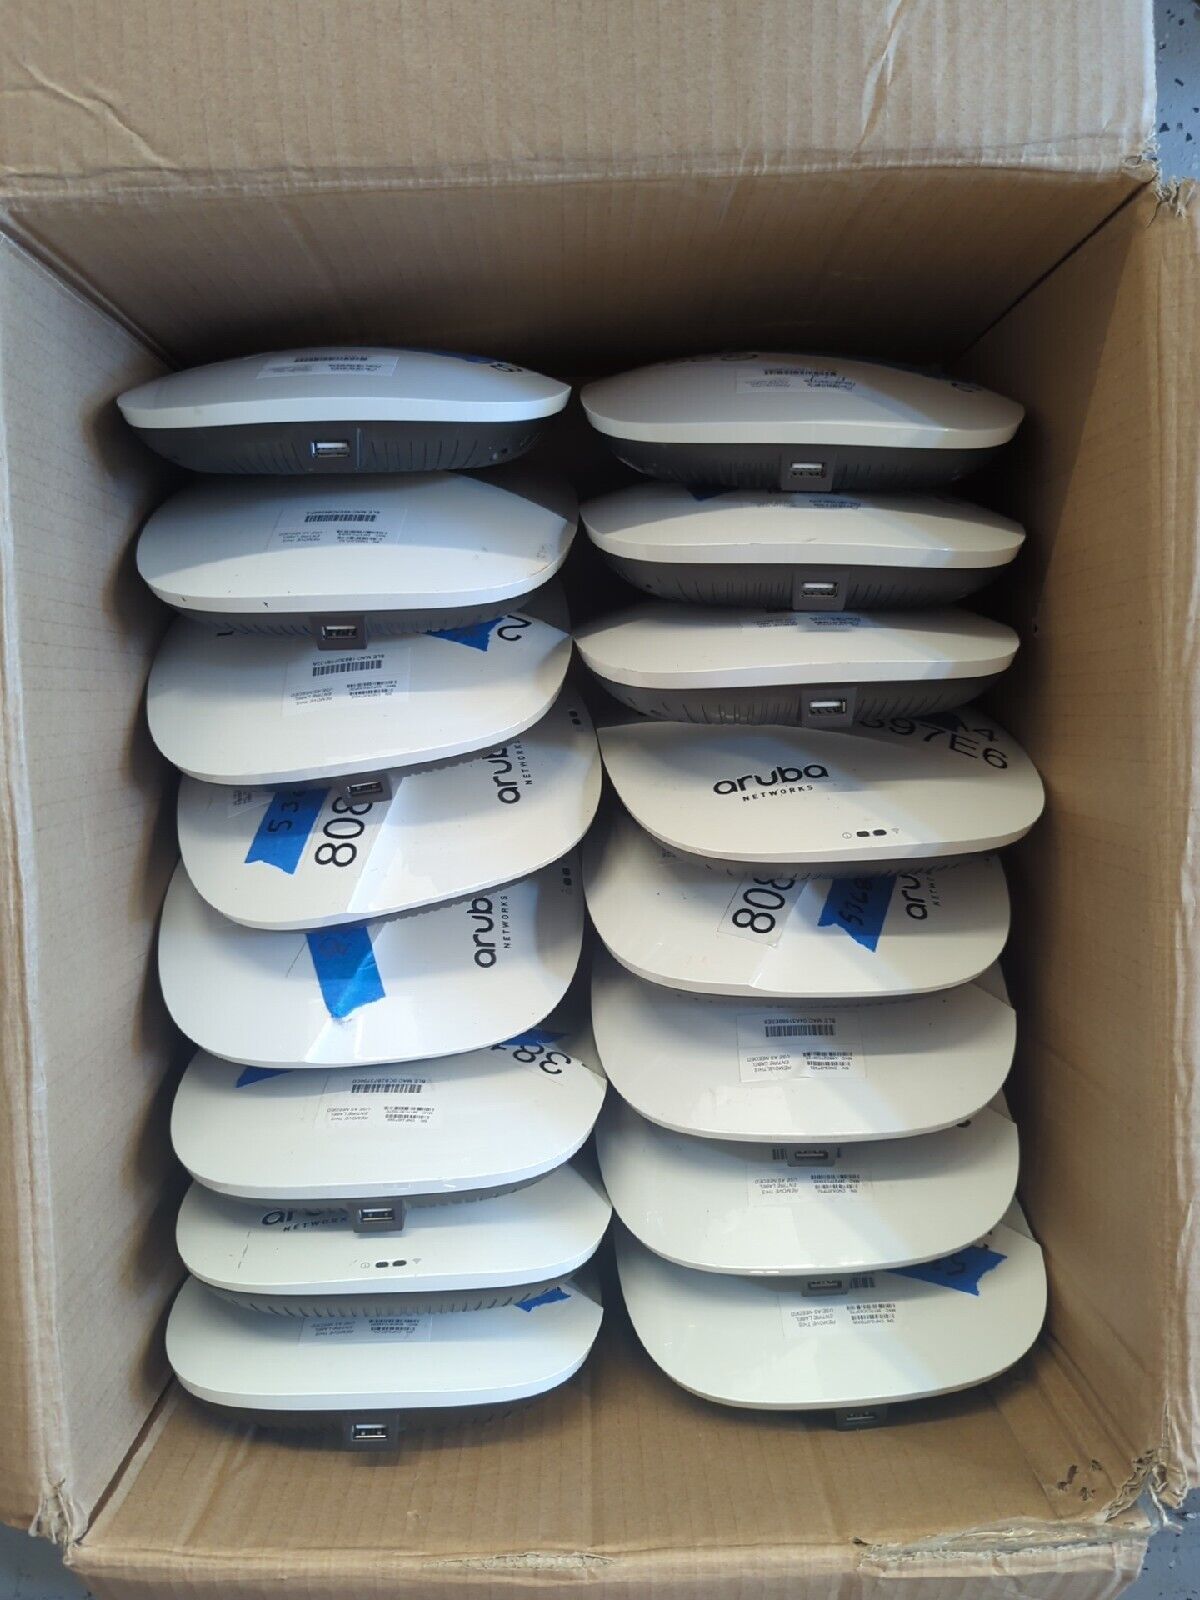 Lot of 16 Aruba Networks AP-315 Wireless Access Point APIN0315 *UNTESTED* 